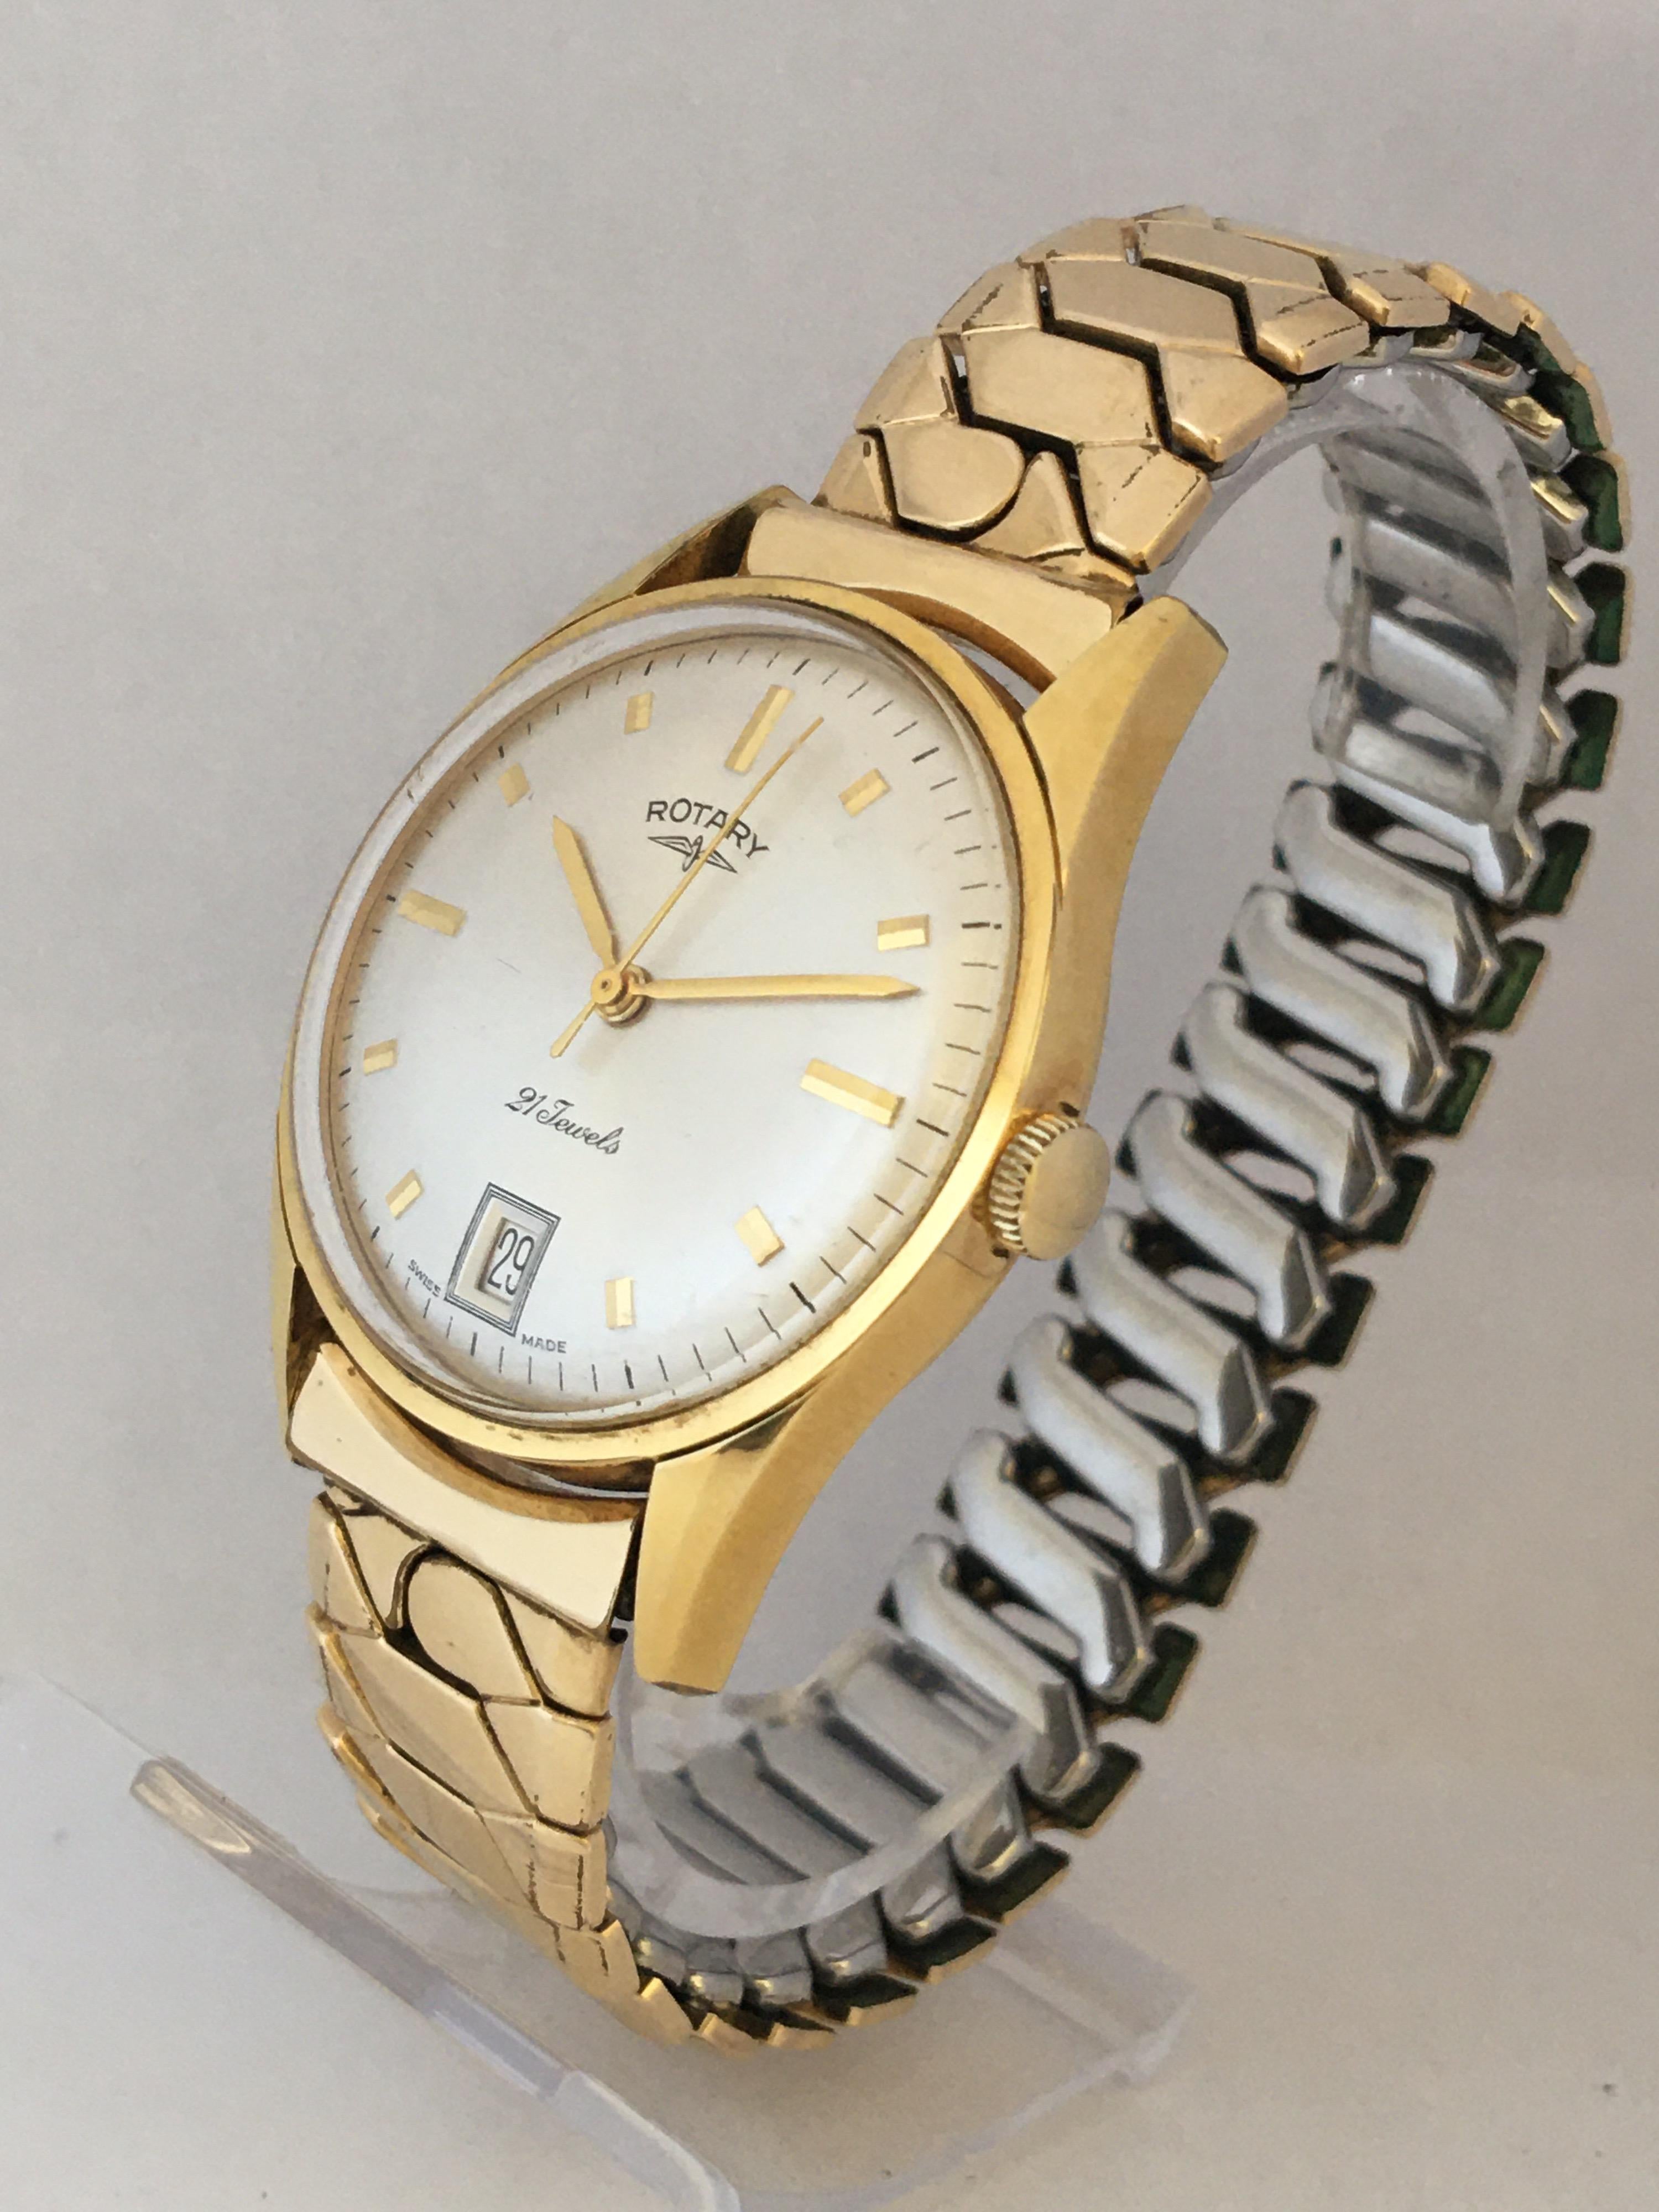 This beautiful vintage pre-owned hand-winding Watch is working and it is ticking and running well.

Visible signs of ageing and gentle used with slight tarnishes on the 6 inches long 18K gold plated and stainless steel back flexible metal strap.